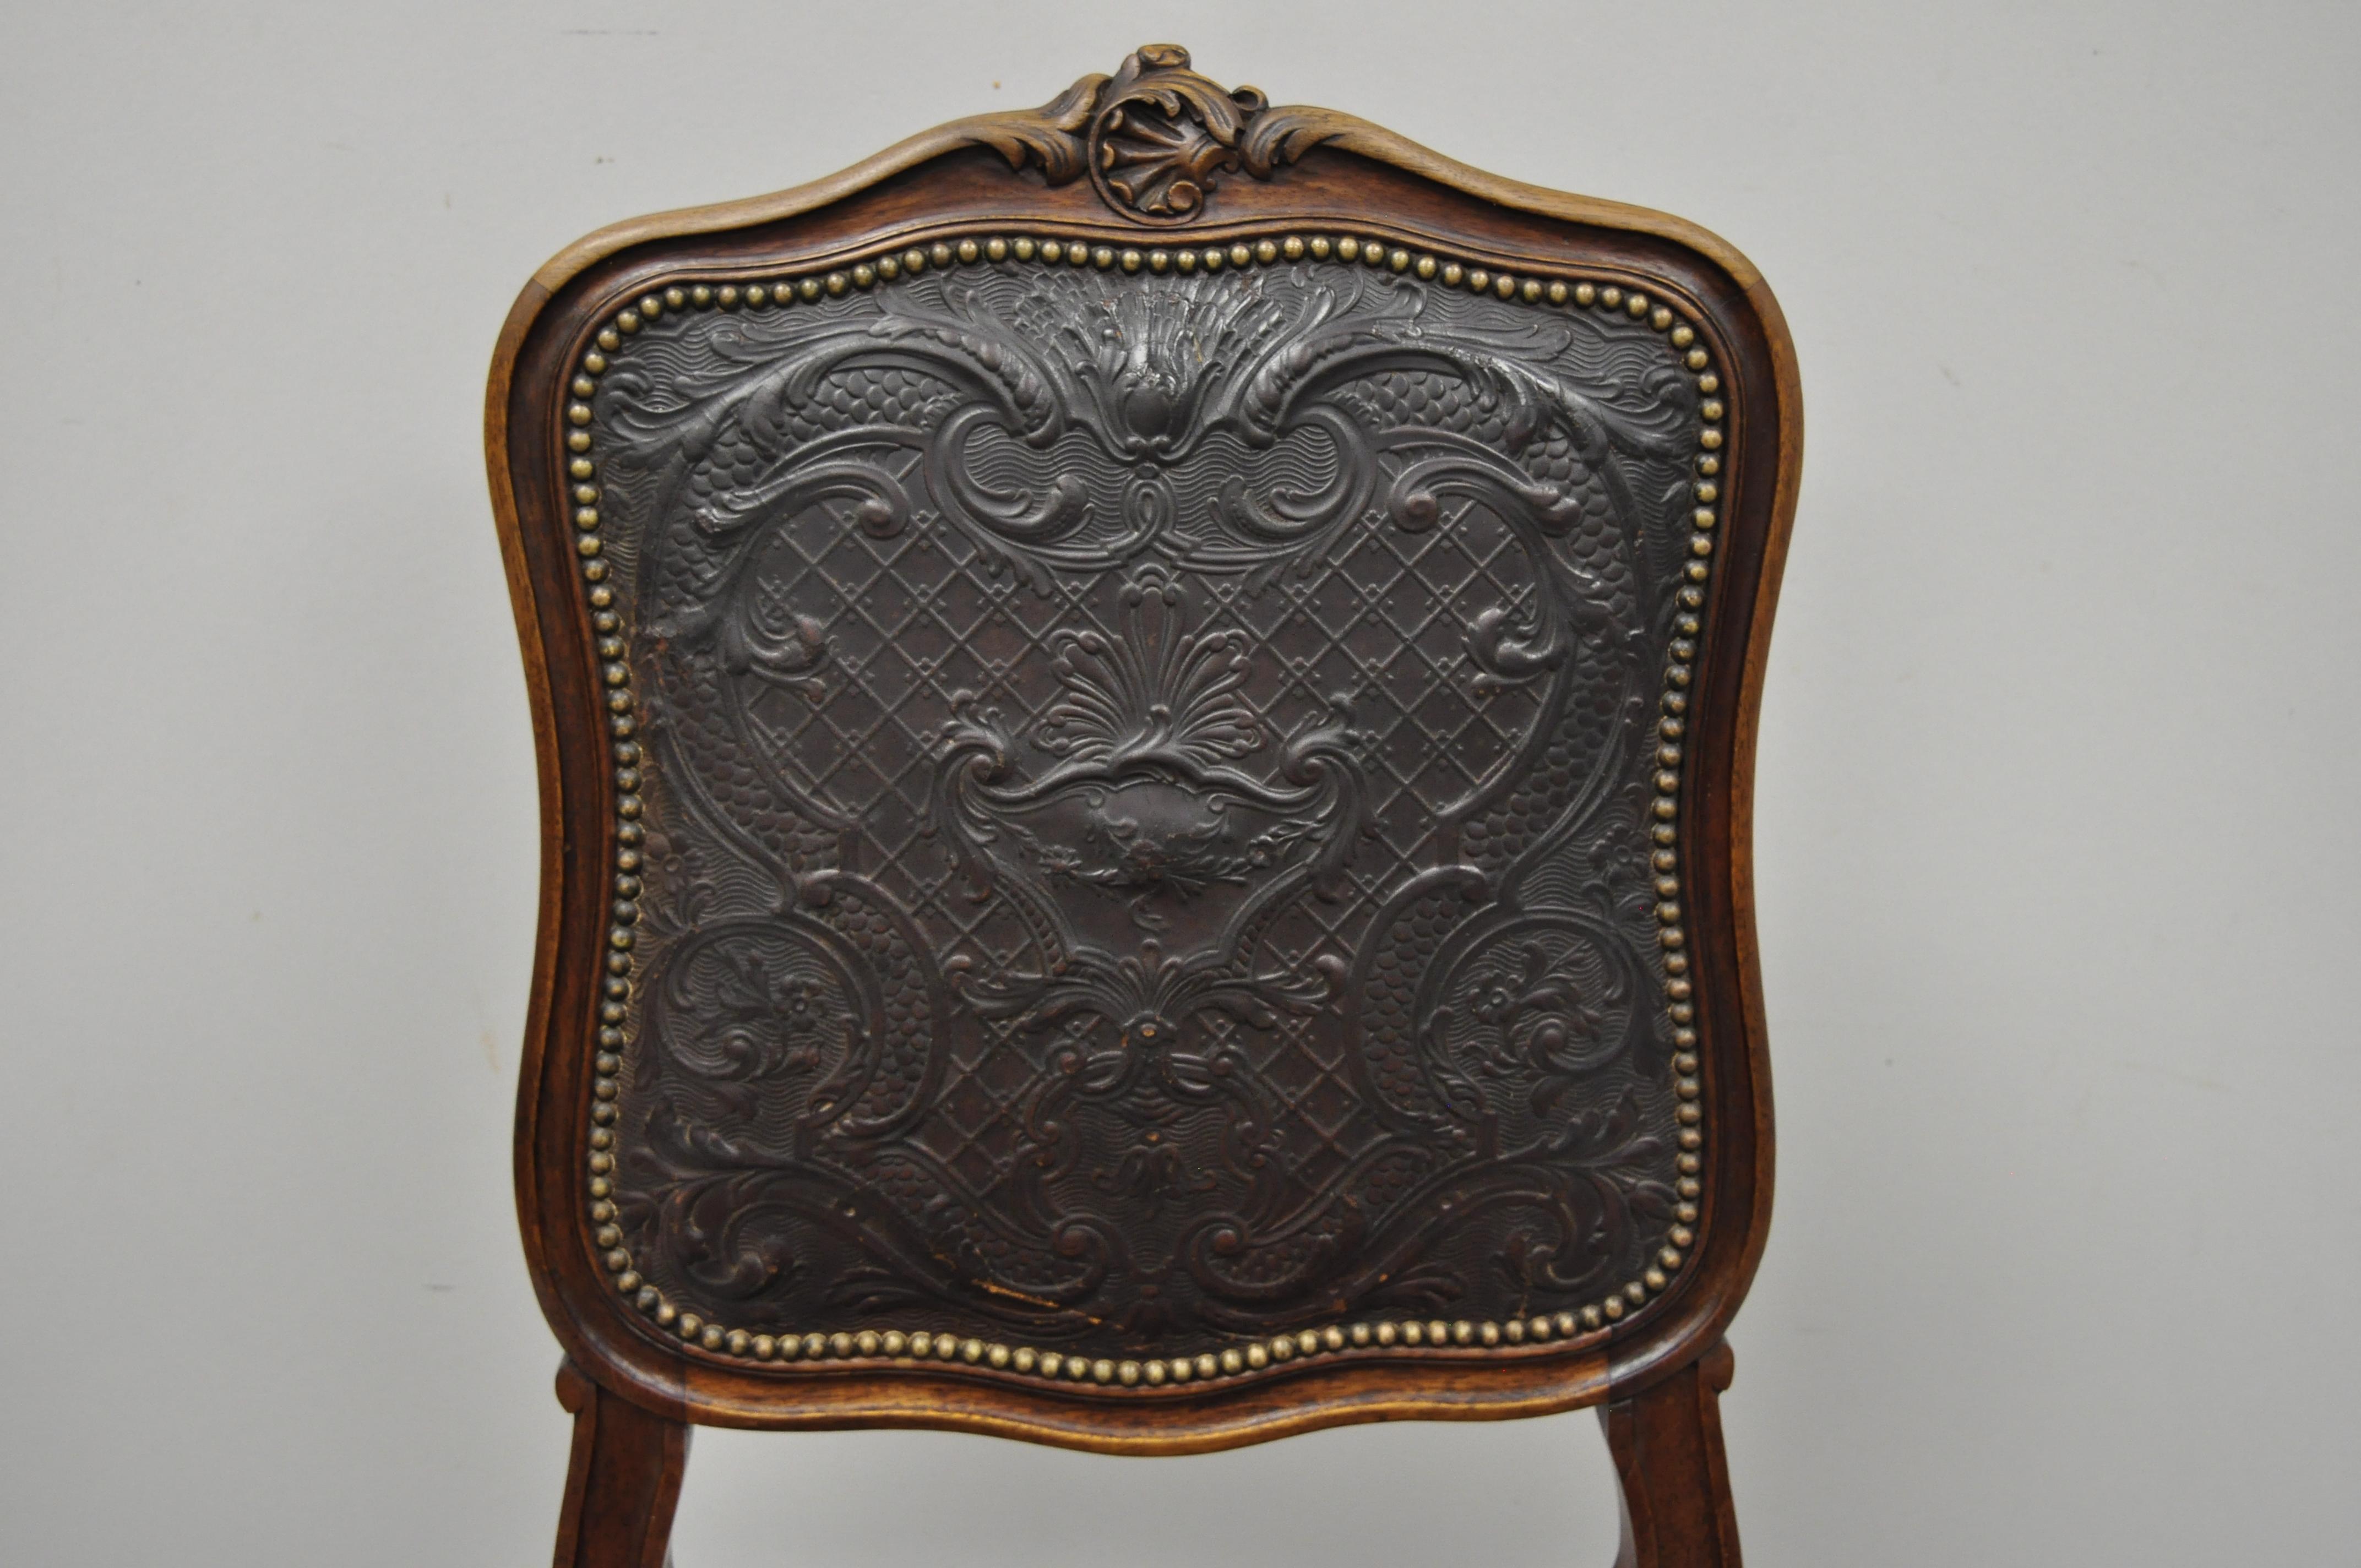 Antique French Louis XV fancy brown embossed leather walnut side chair(A). Item features brown embossed leather back and seat, nailhead trim, solid wood frame, finely carved details, cabriole legs, very nice antique item, great style and form, circa